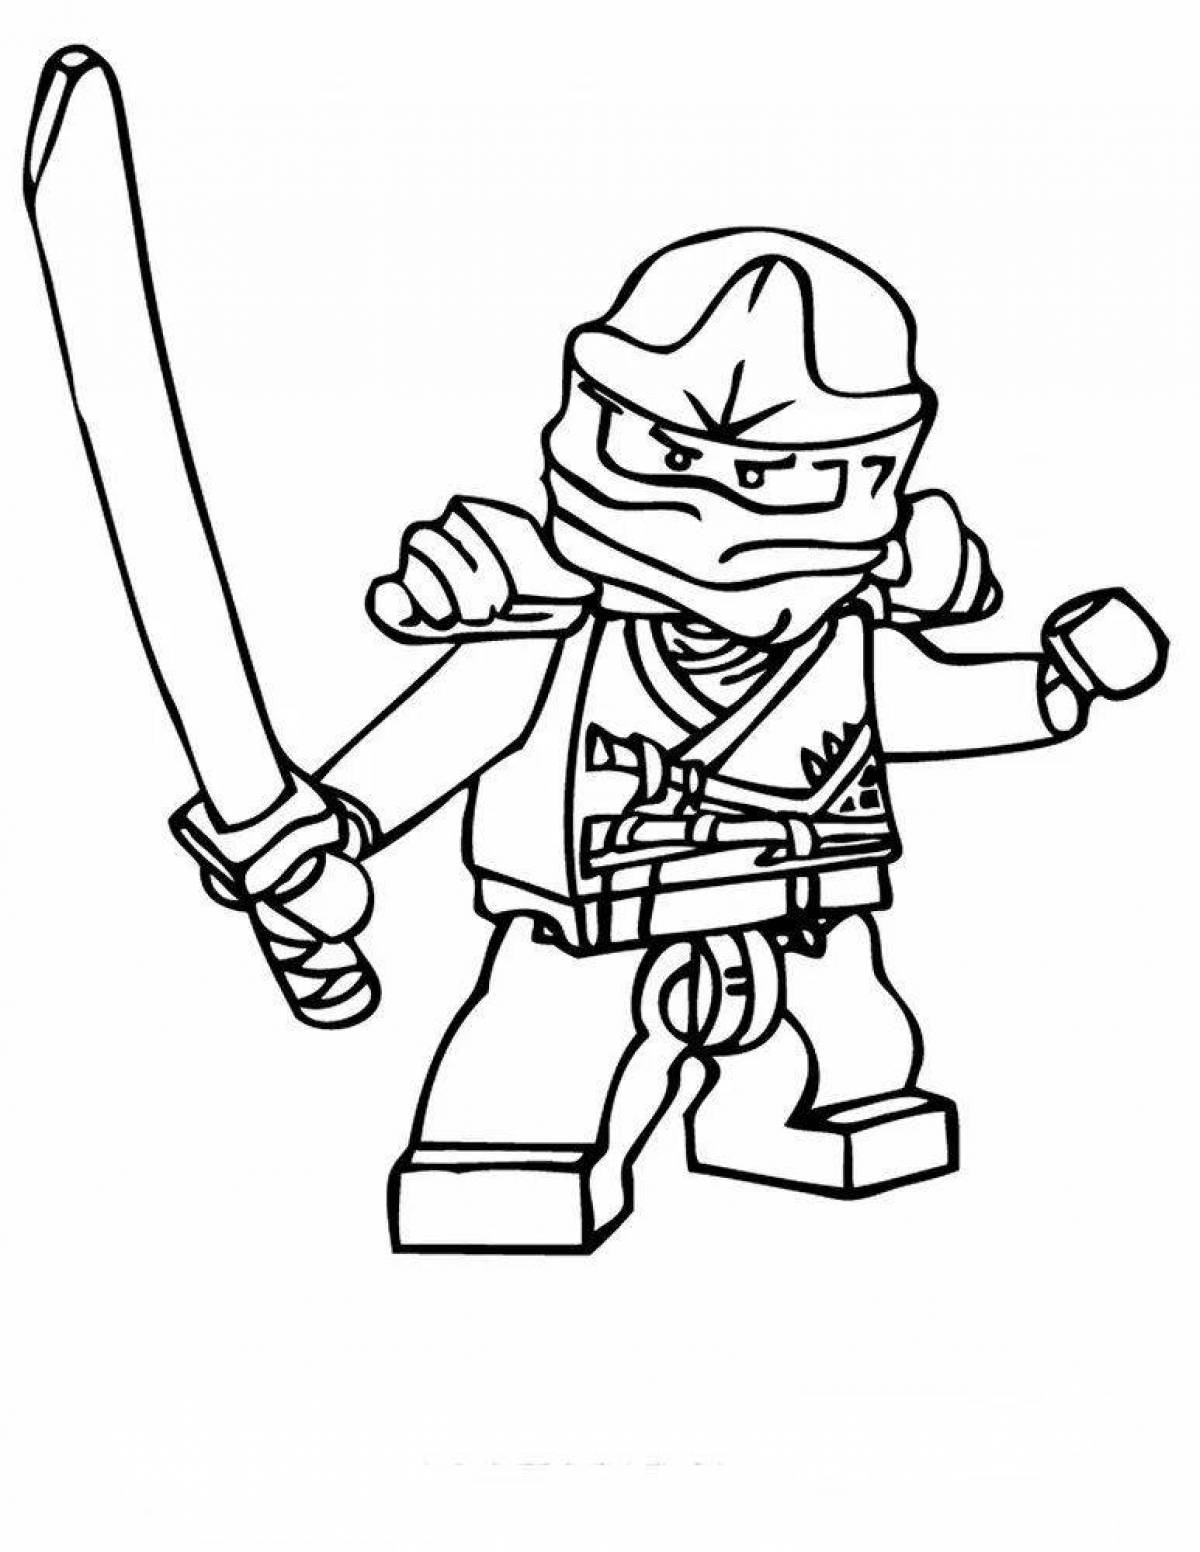 Exciting coloring lego ninja